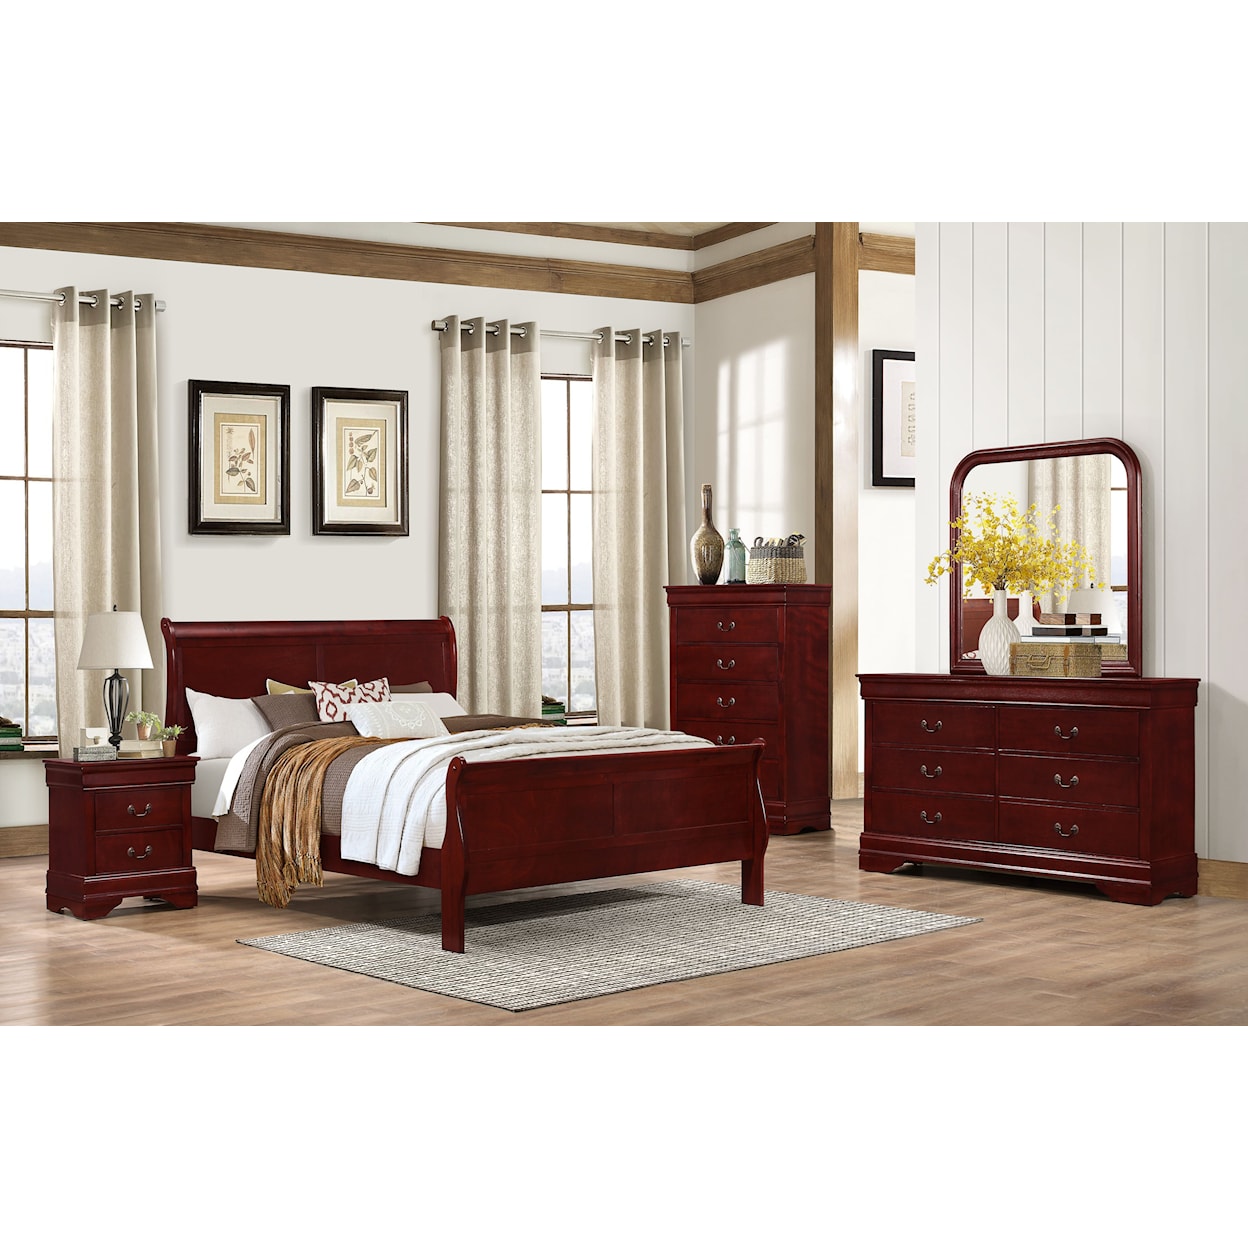 Lifestyle 4937 5 Piece Twin Bedroom Set with Chest